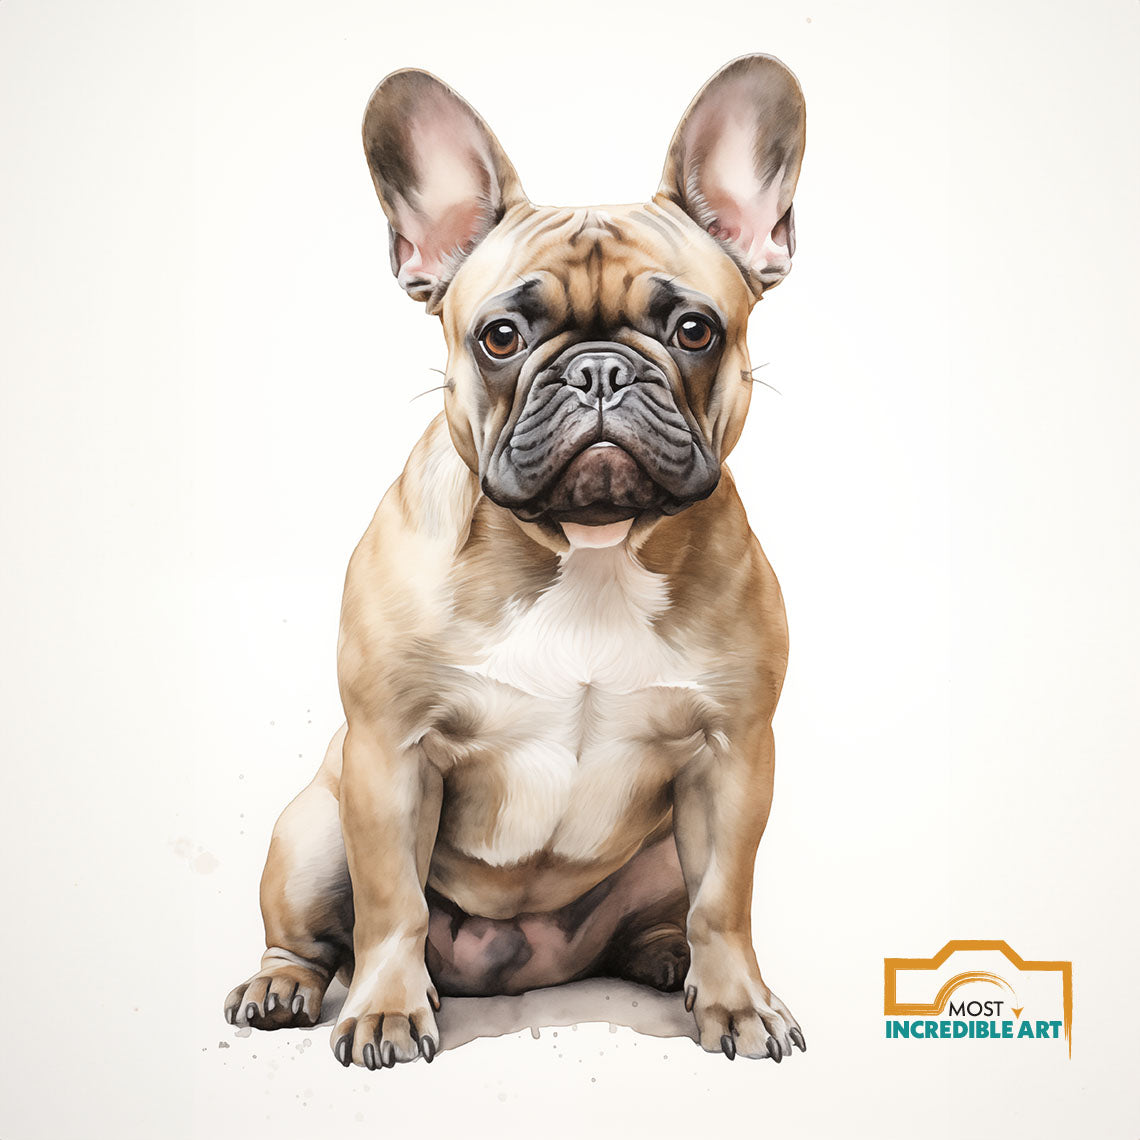 Funny dog artwork that adds humor to your living space